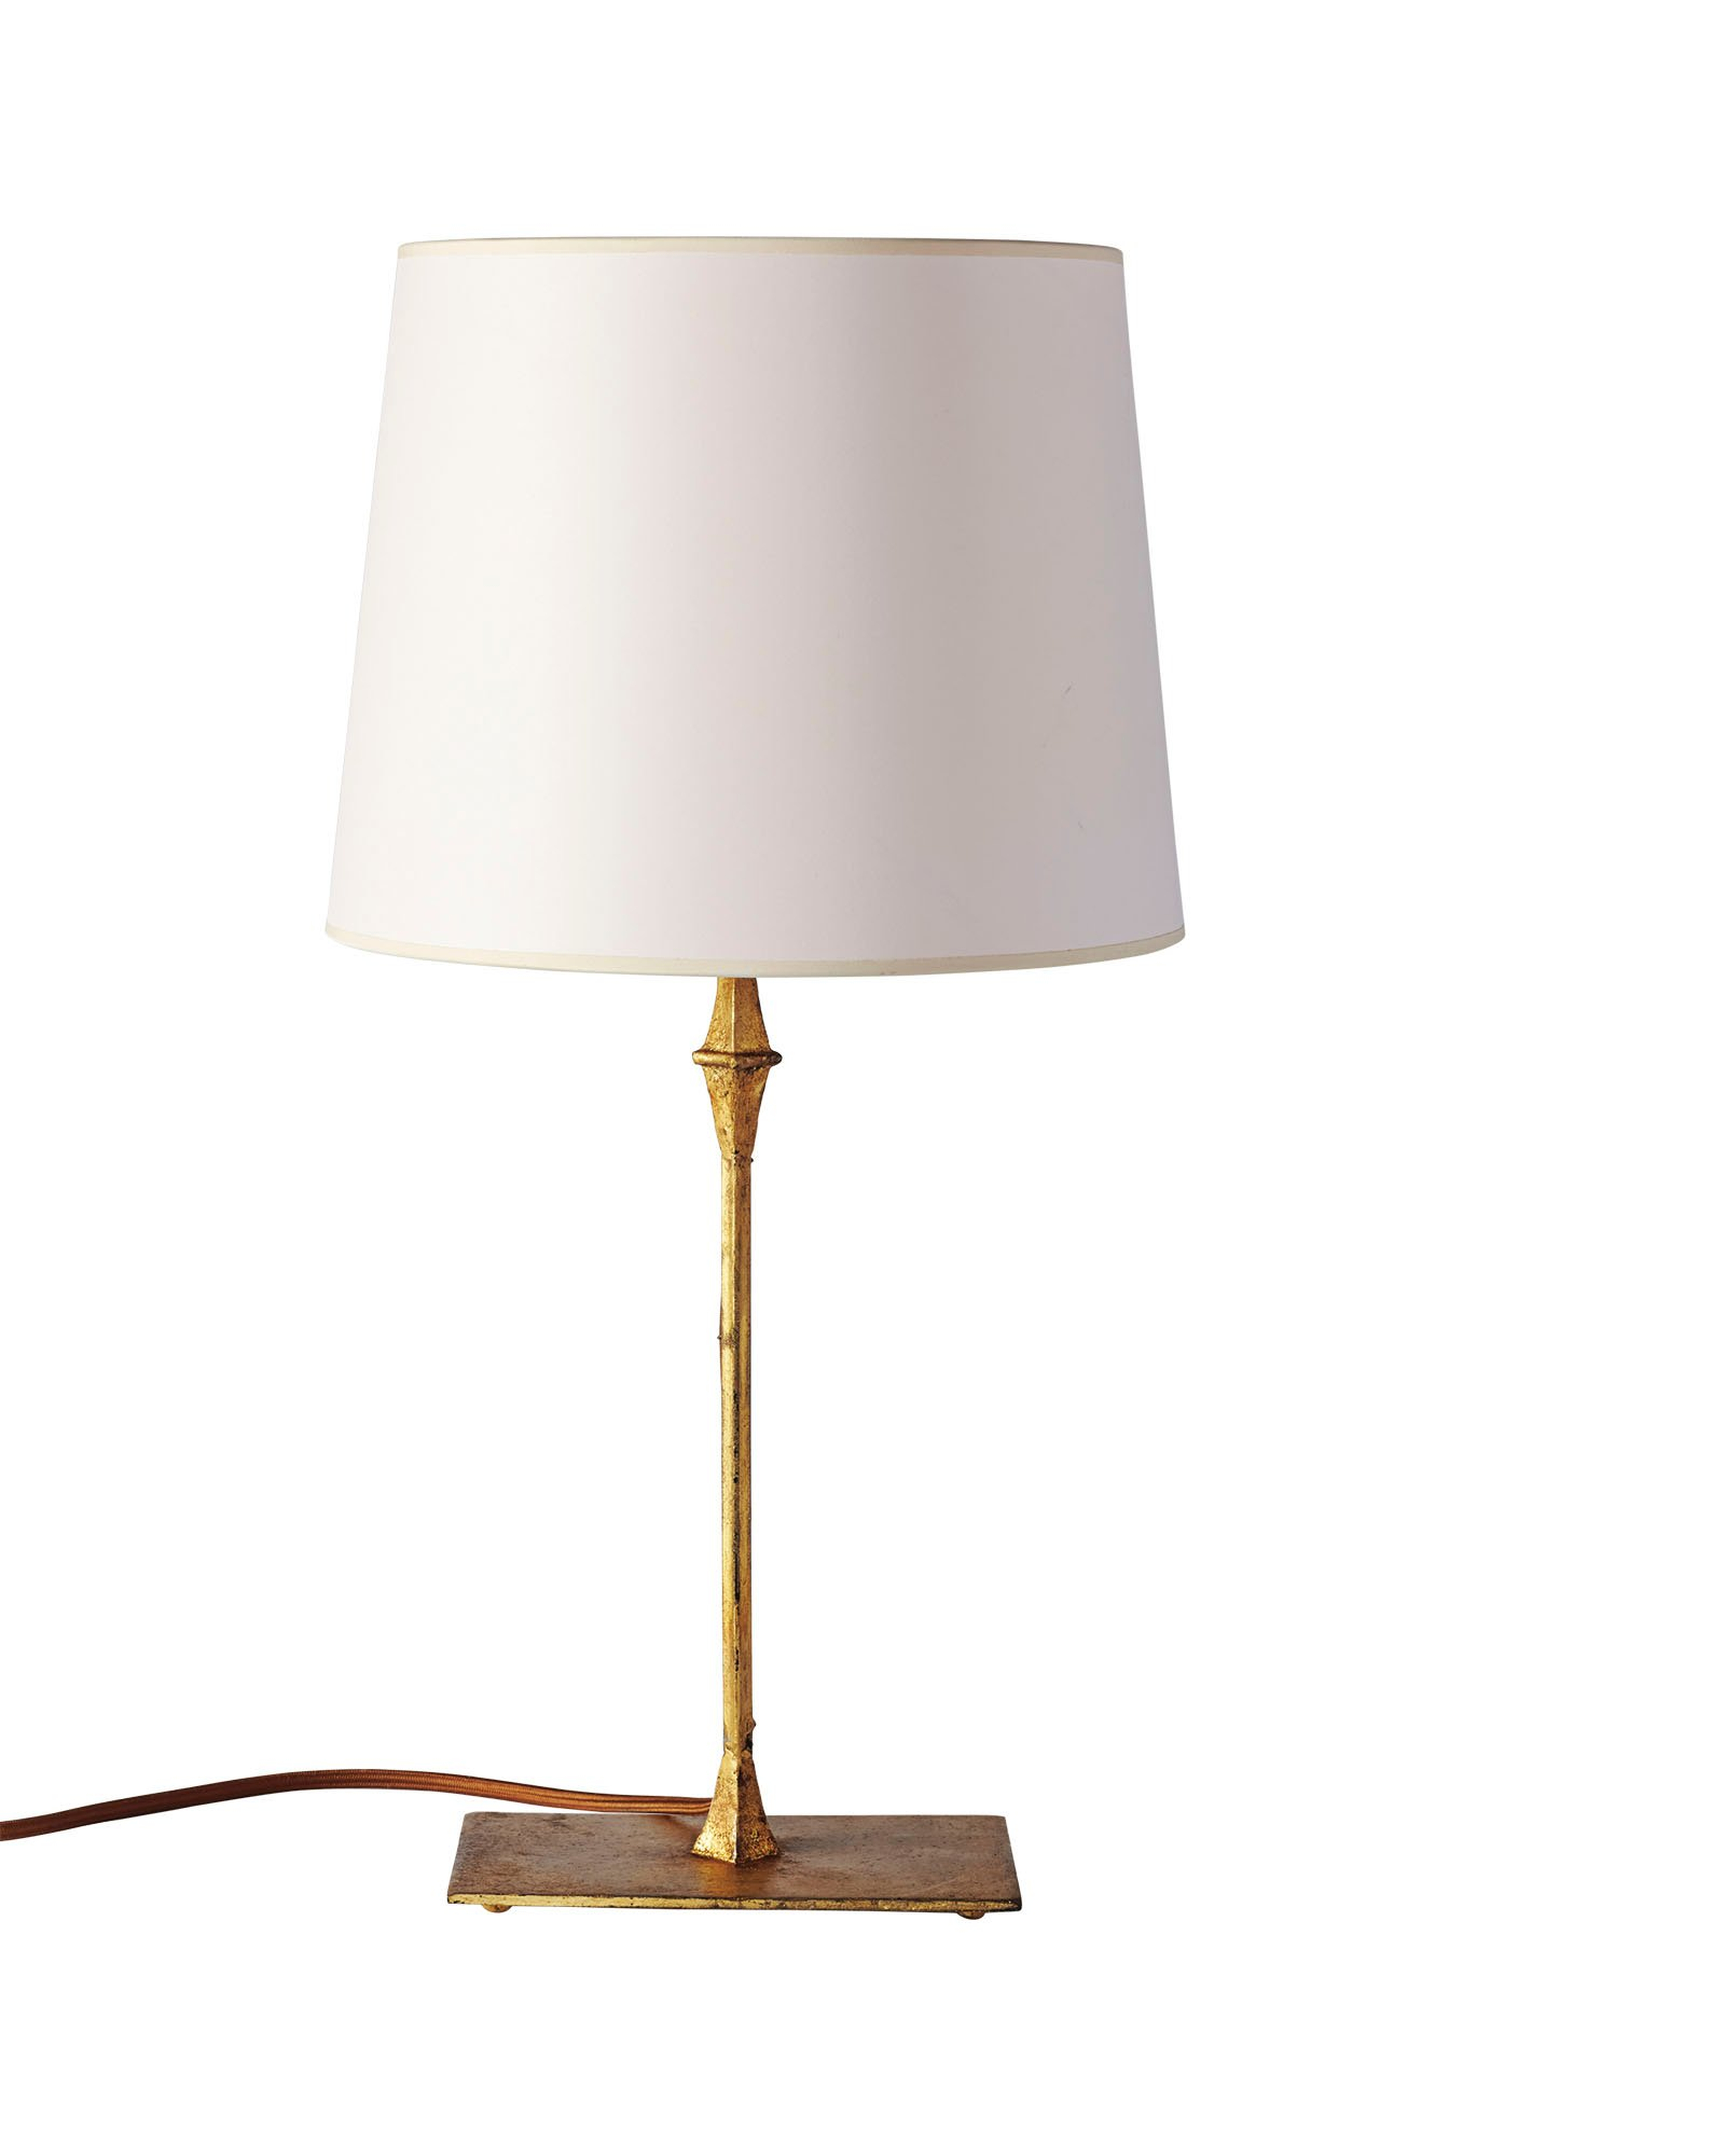 Dauphine Table Lamp - Serena and Lily